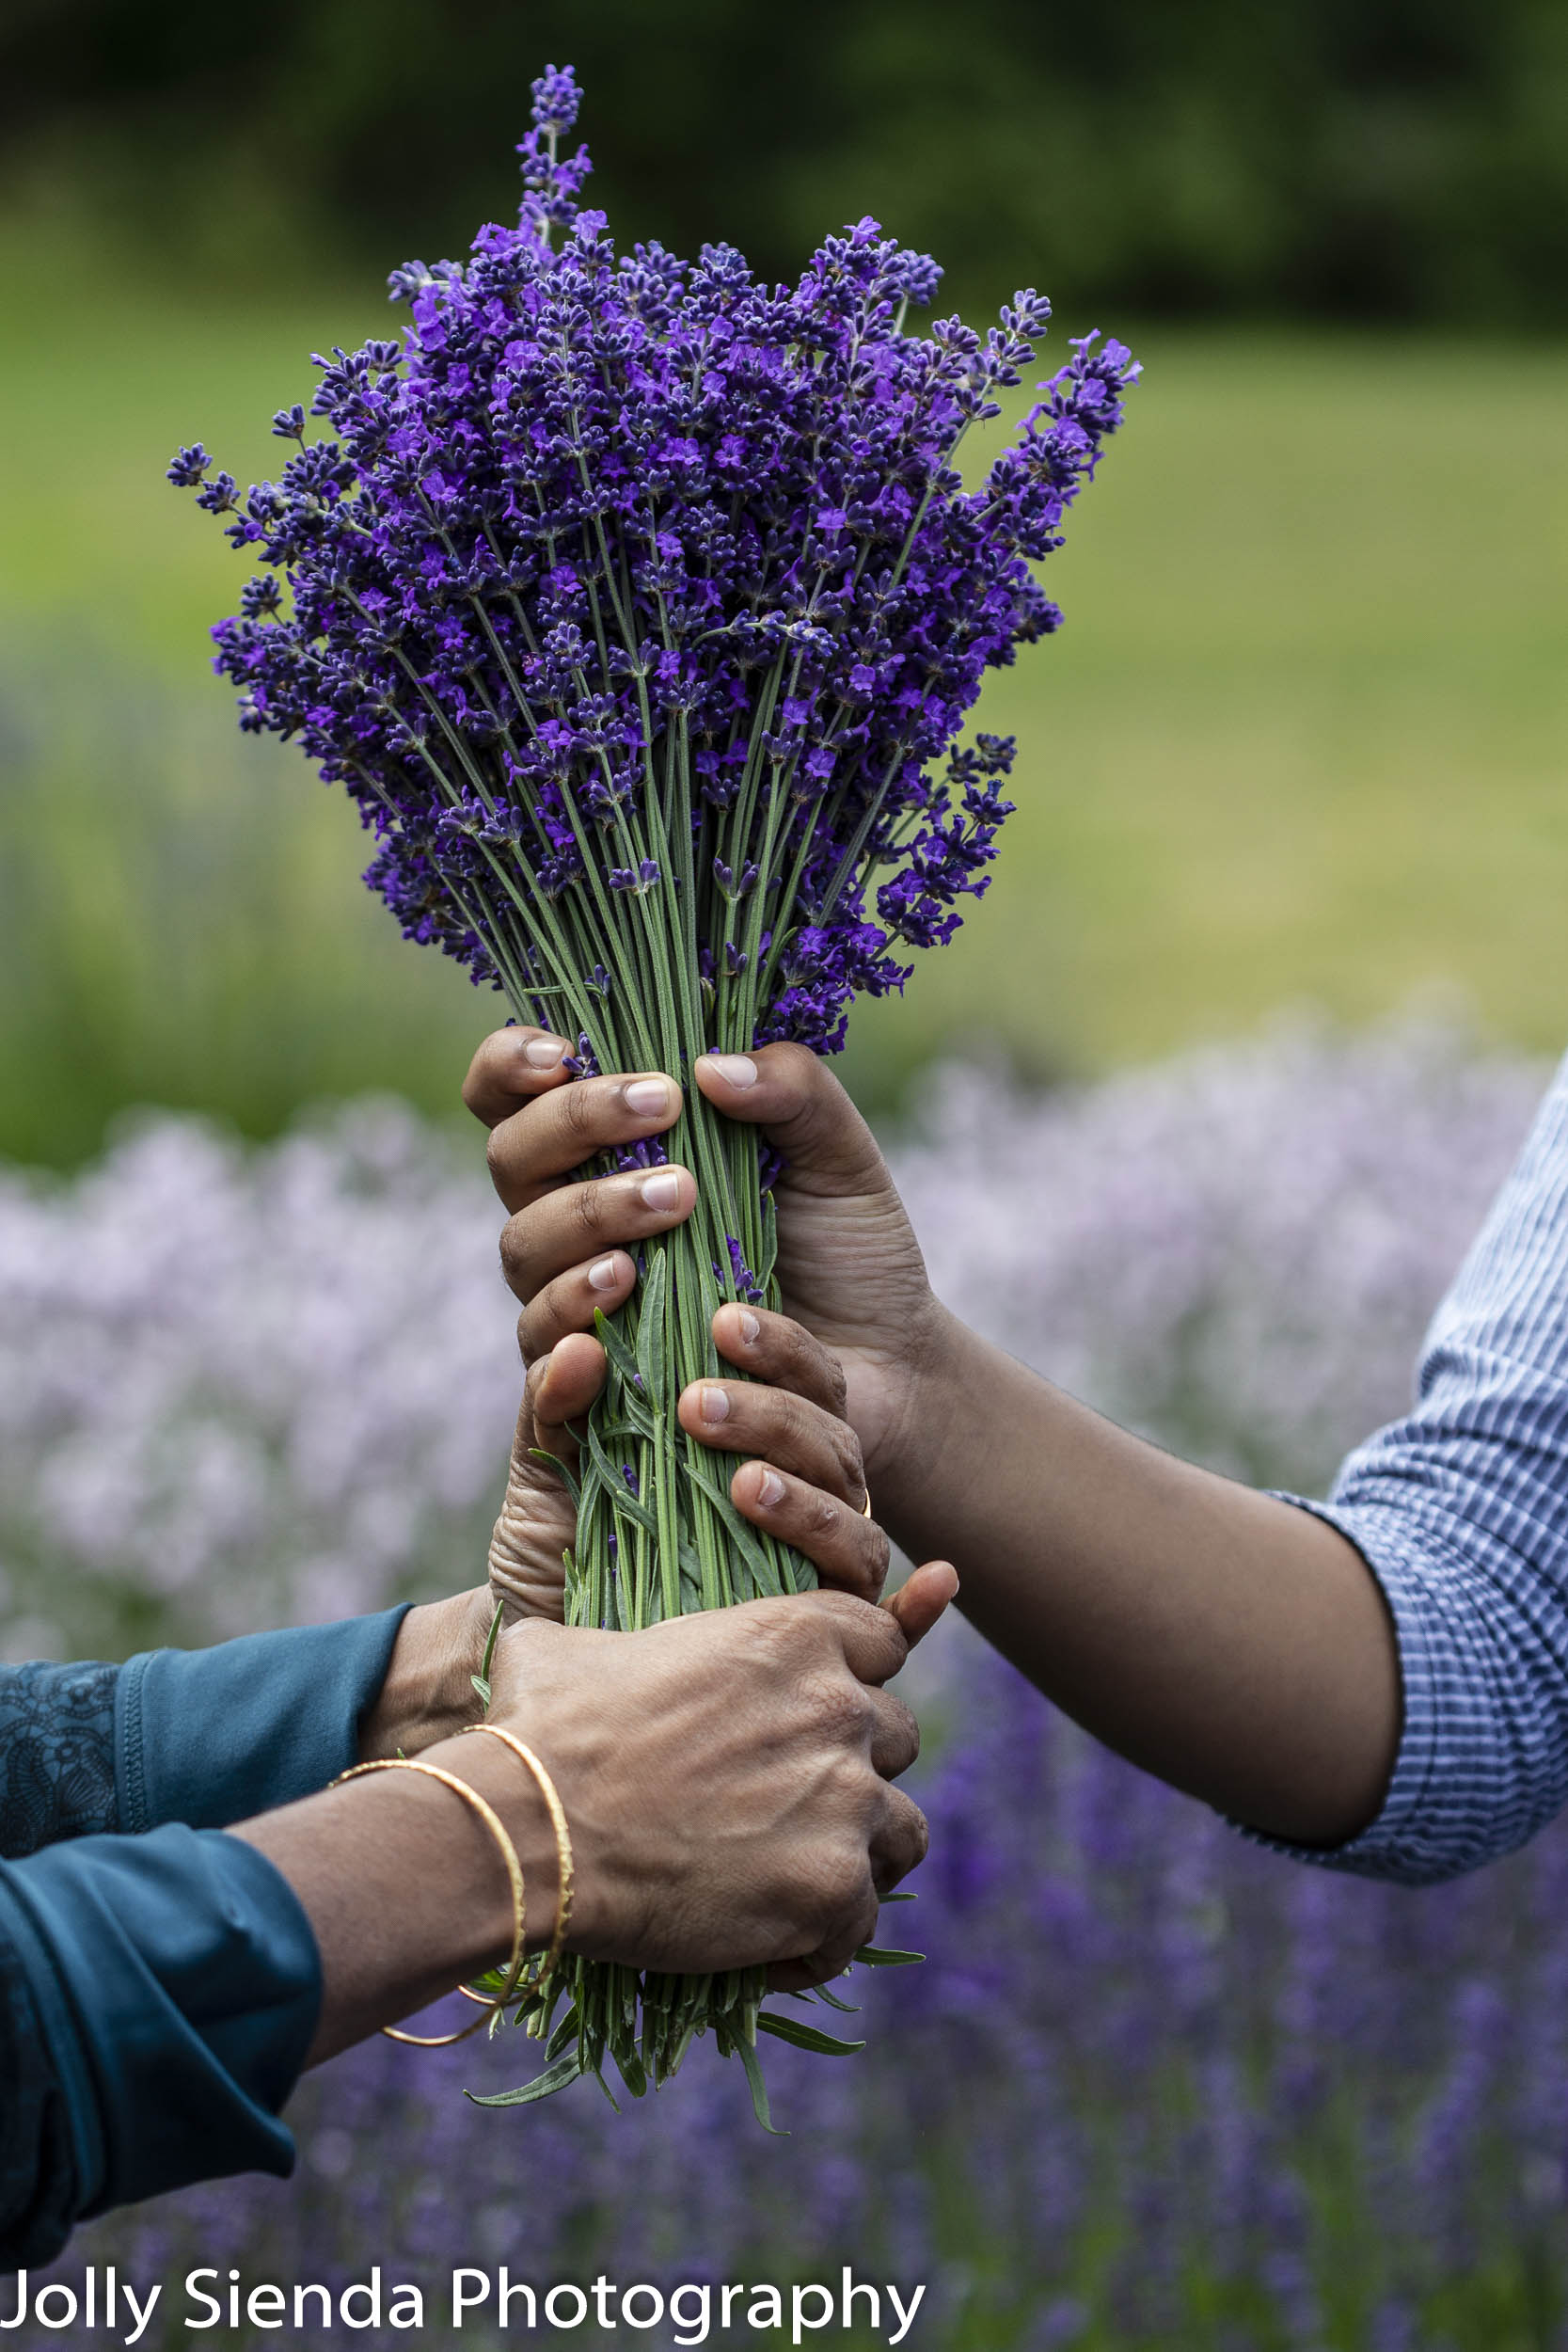 Hands hold the lavender bunch